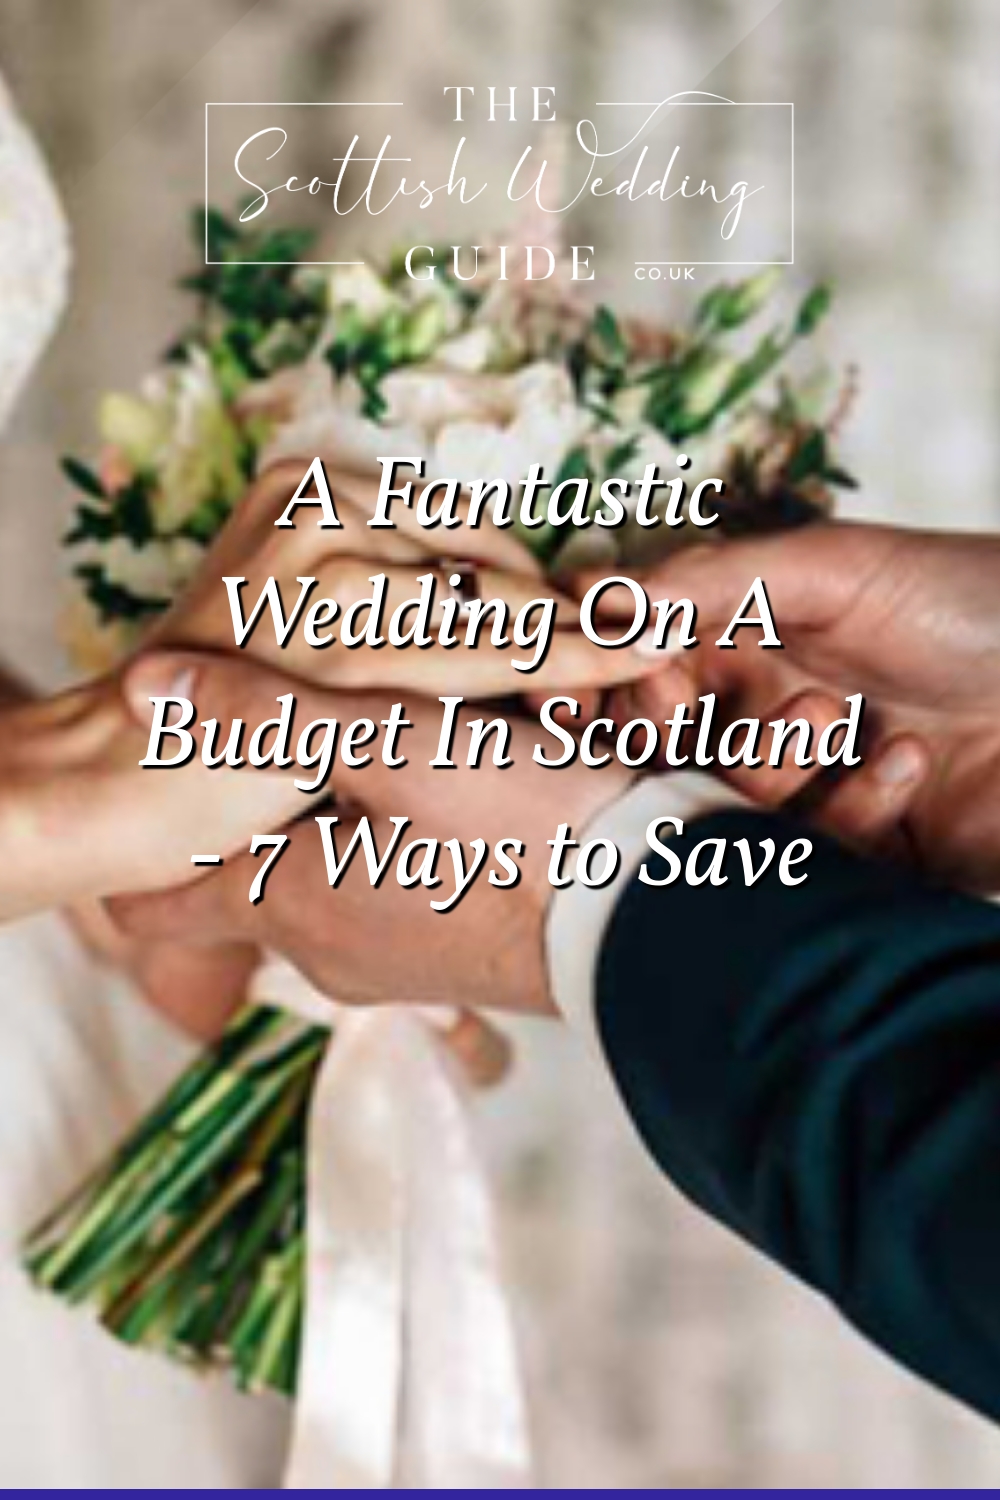 A Fantastic Wedding On A Budget In Scotland – 7 Ways to Save